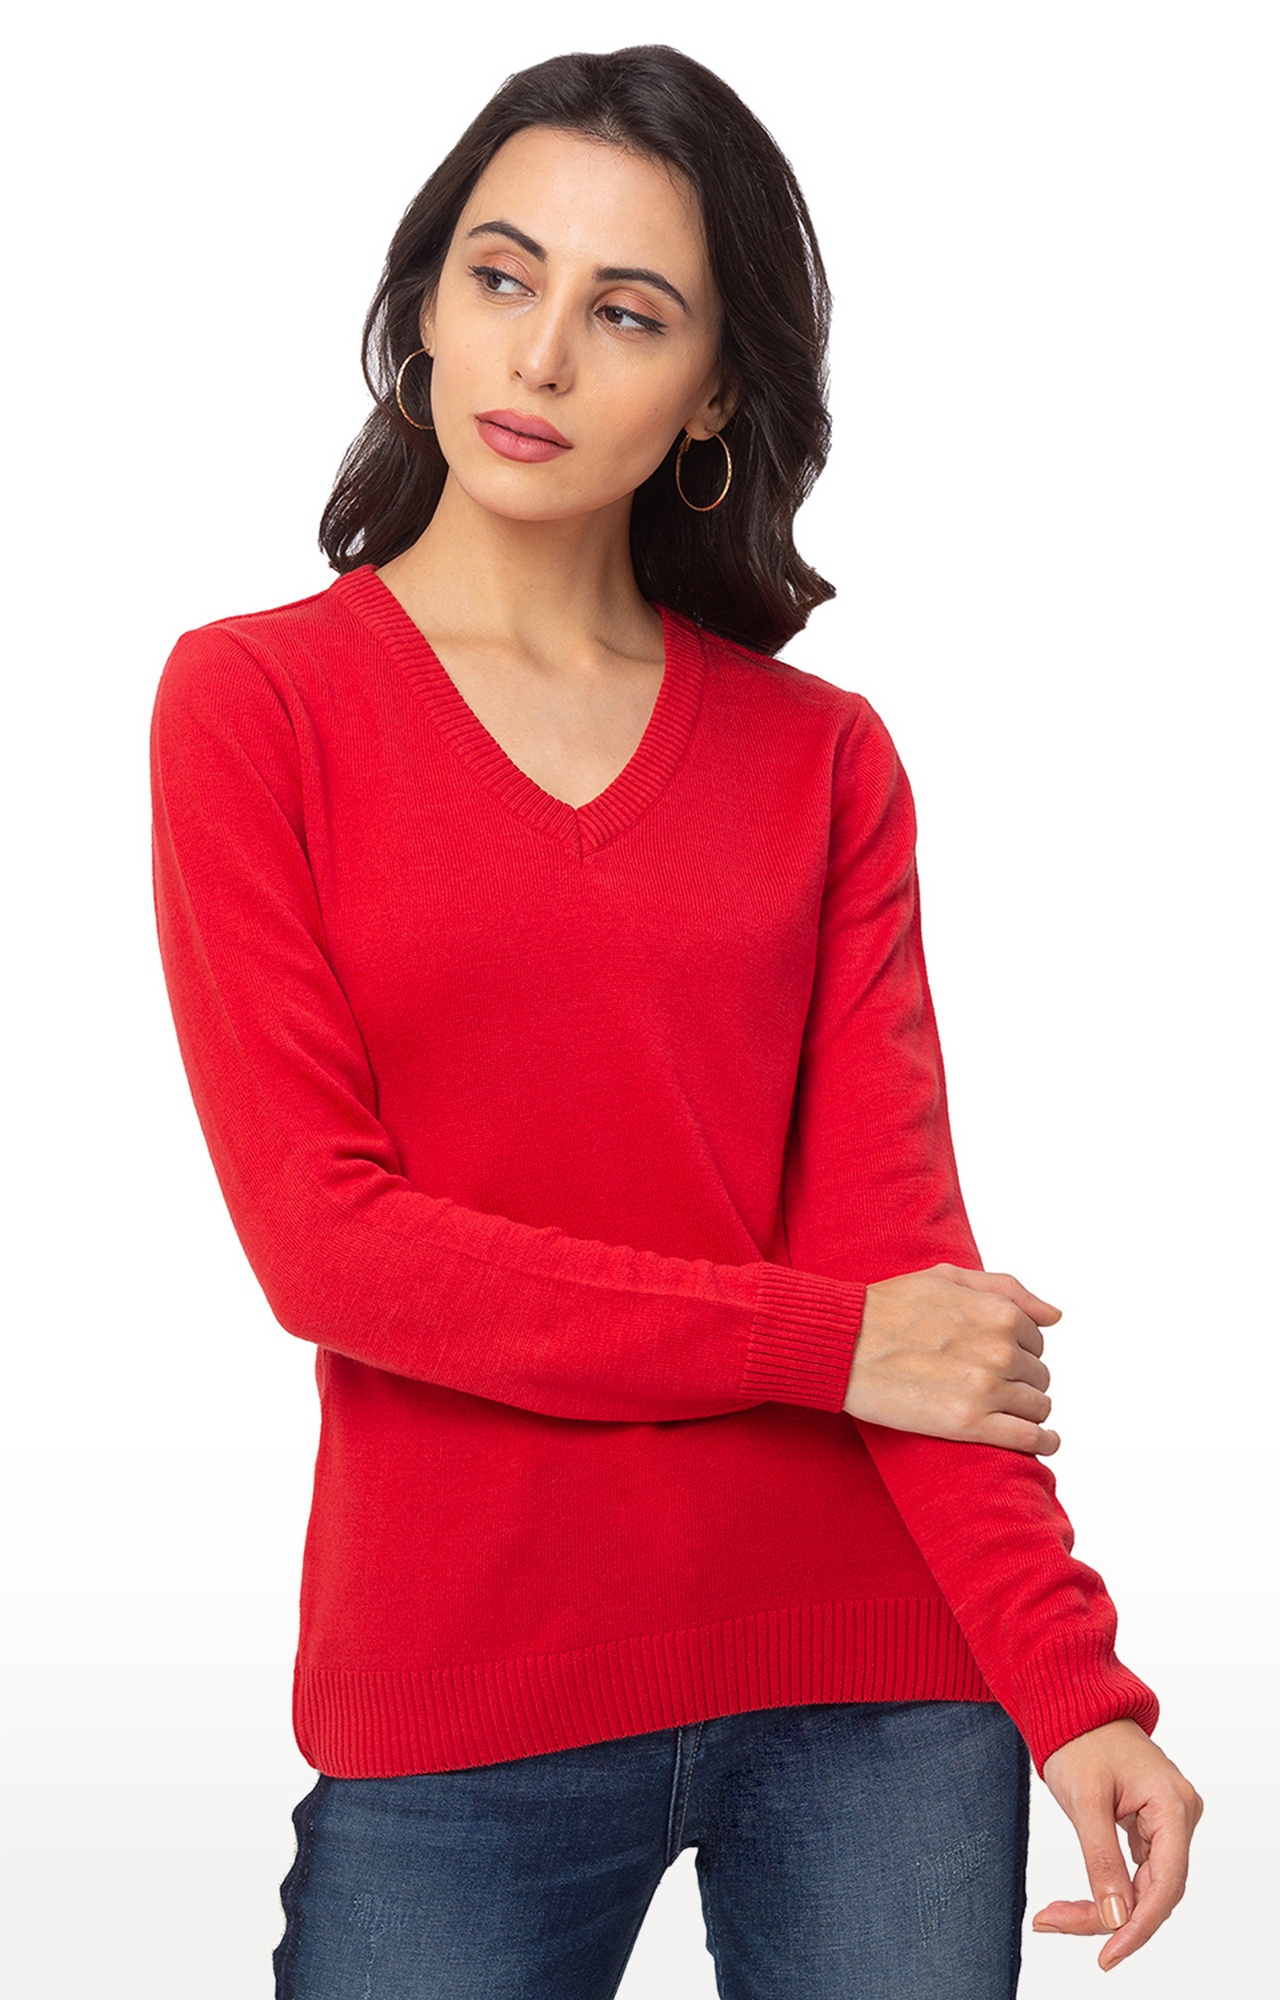 globus | Red Solid Sweater